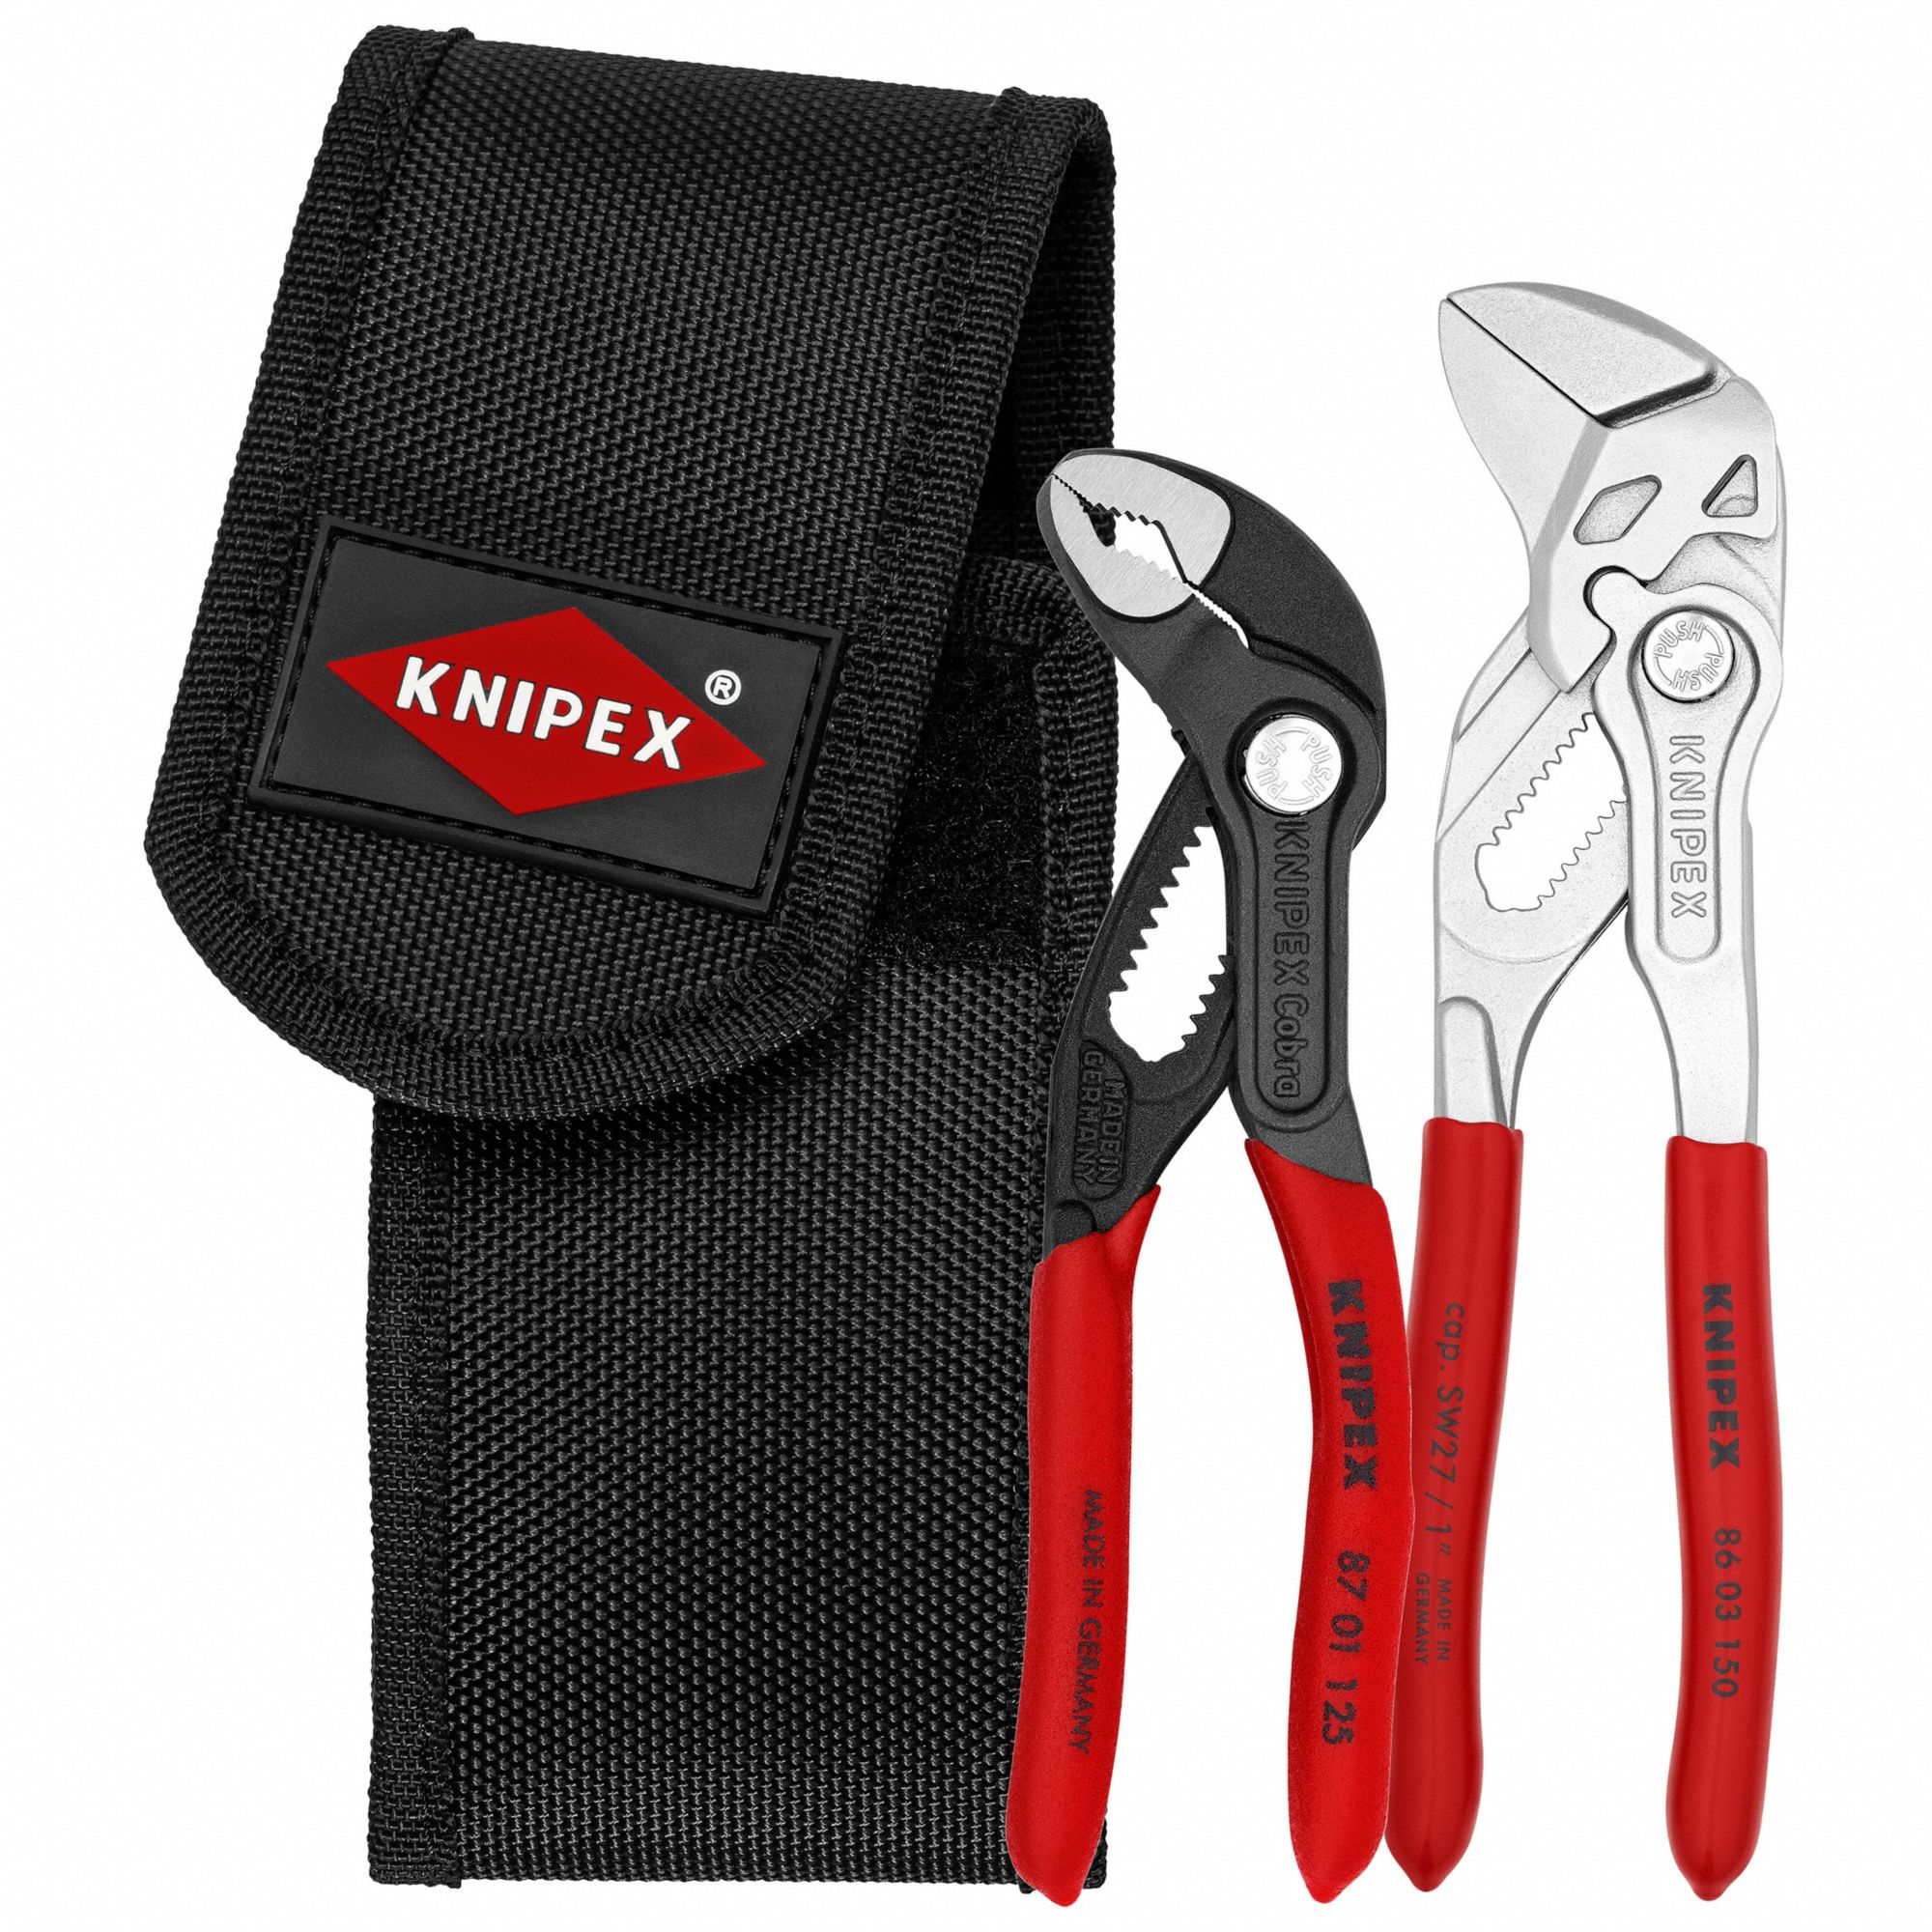 Knipex Pliers Wrench Set with Keeper Pouch 2pc 9K 00 80 109 US